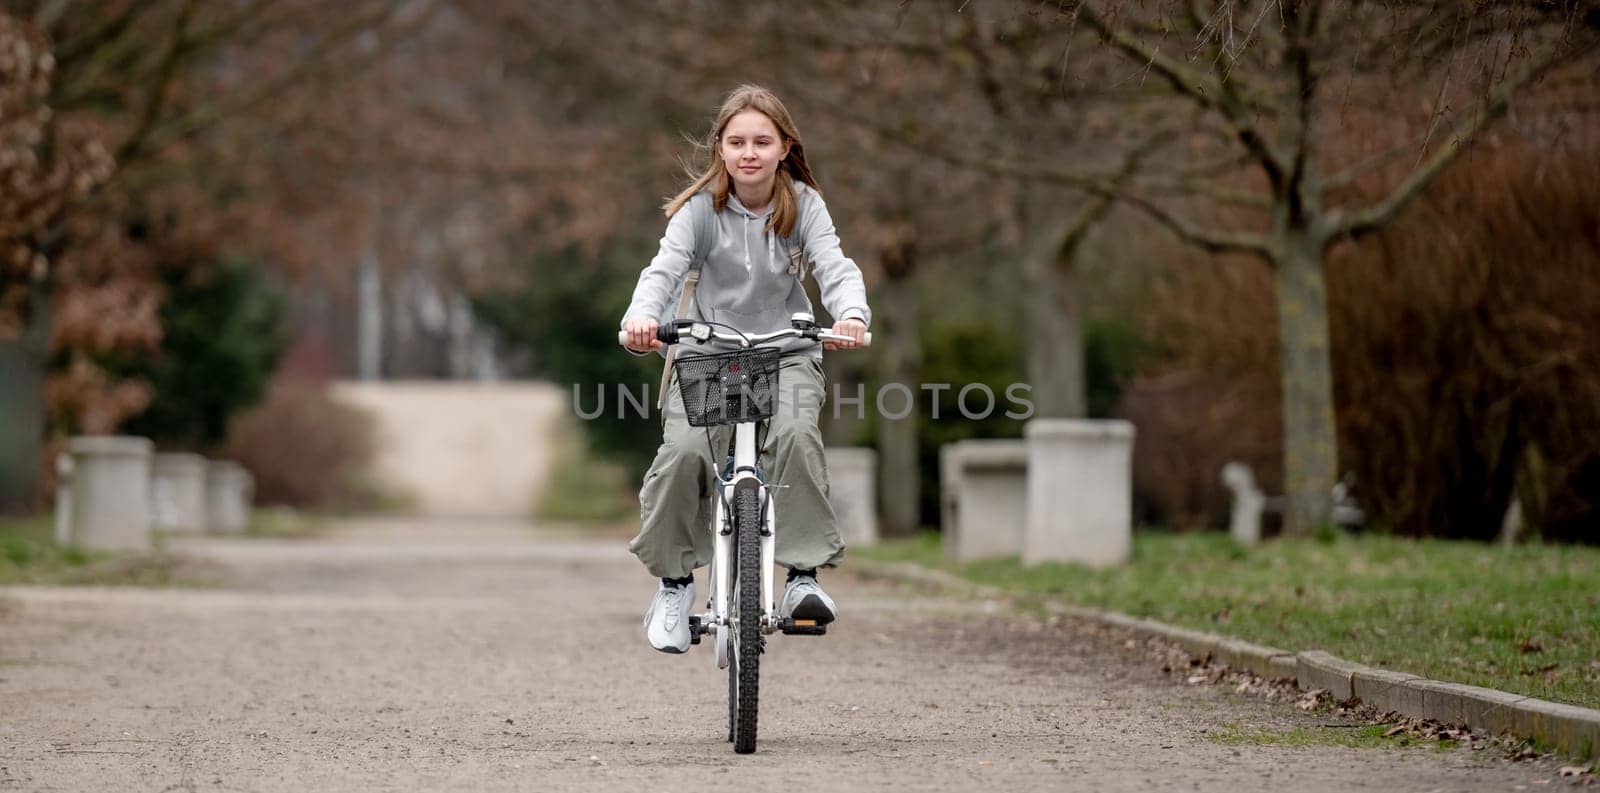 Warm Weather Sees Girl Riding Bicycle Through Spring Park